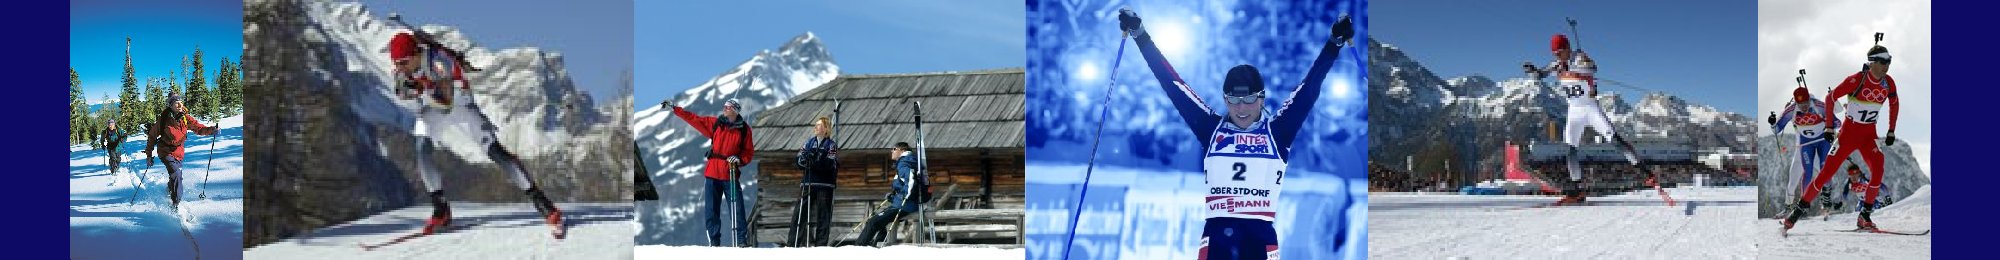 Coss-country skiing specialist